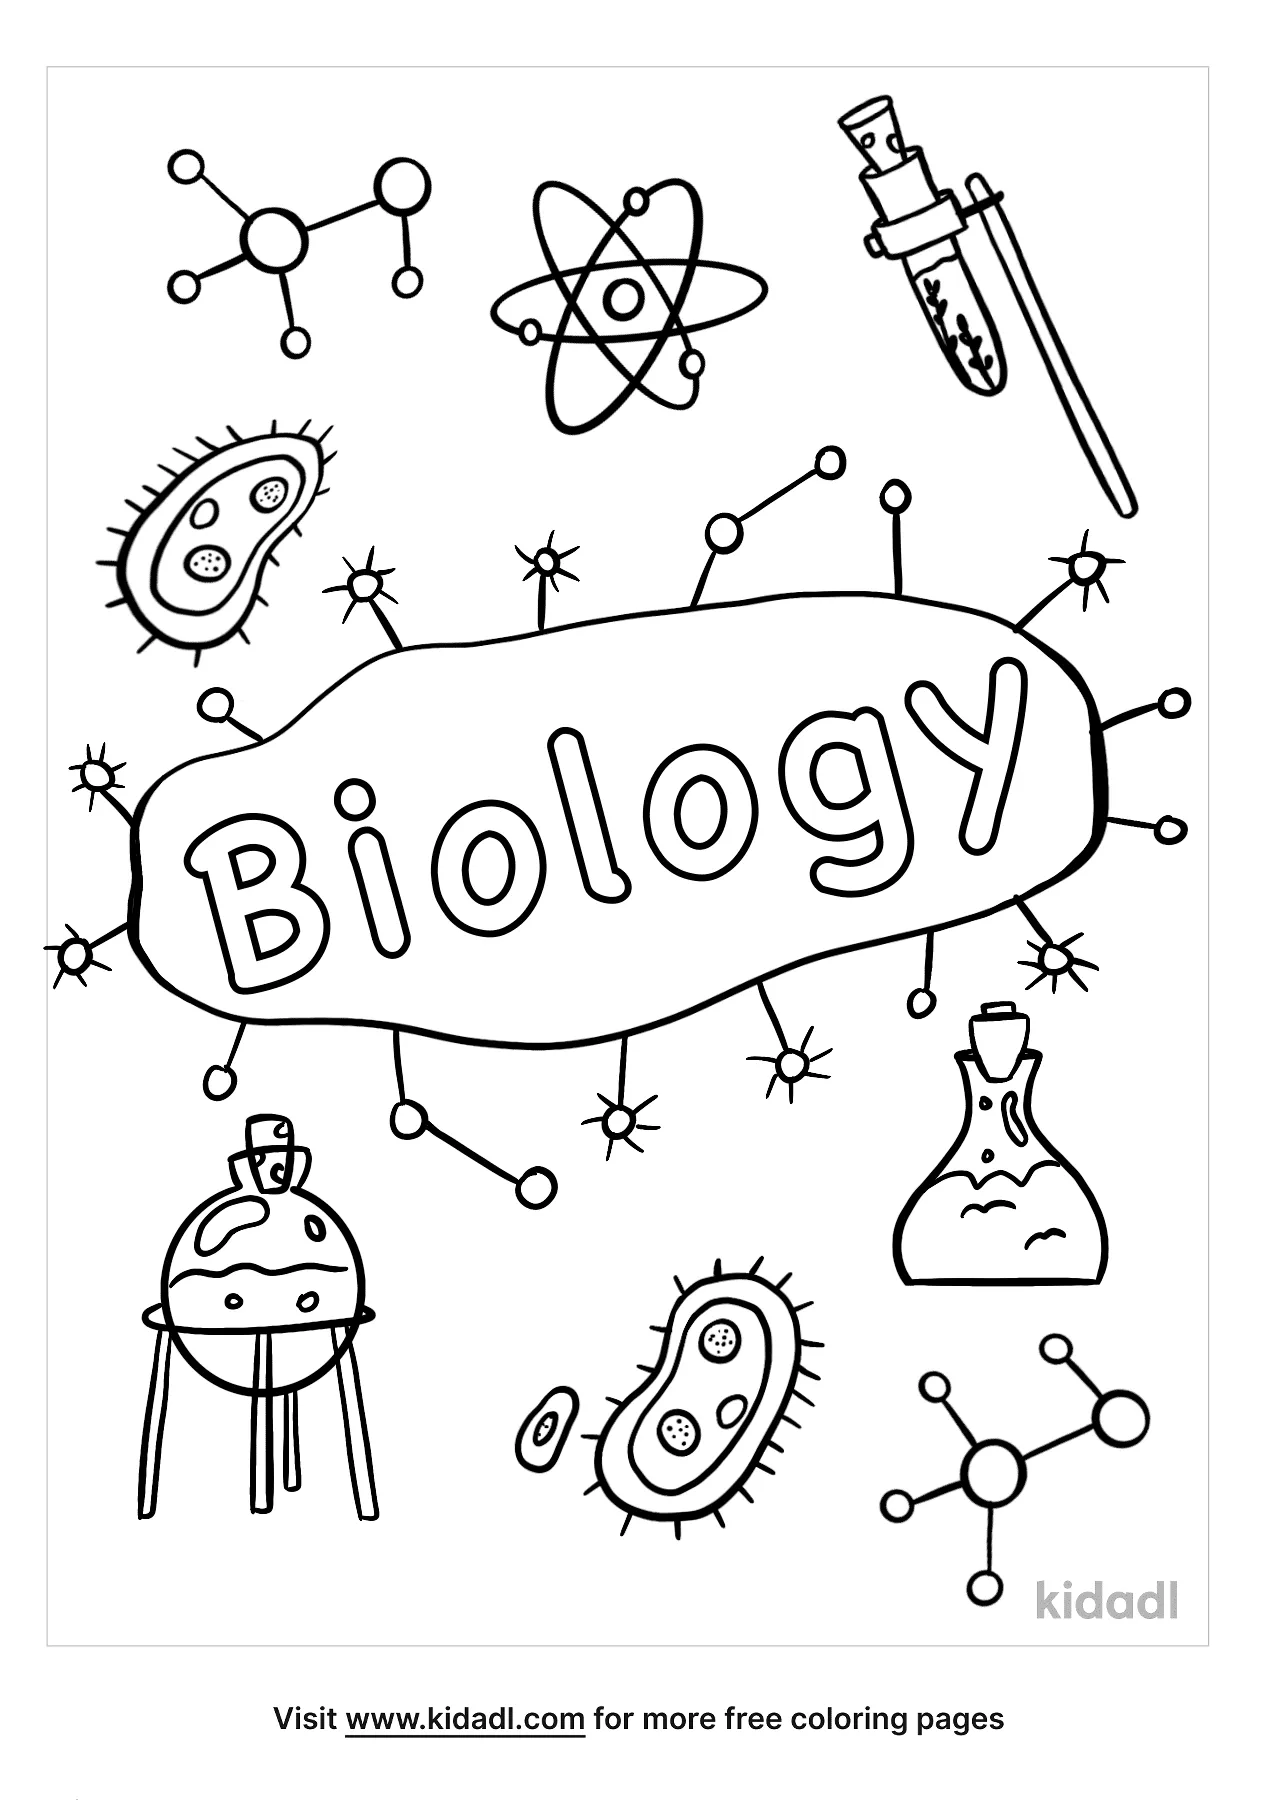 Biology Coloring Pages